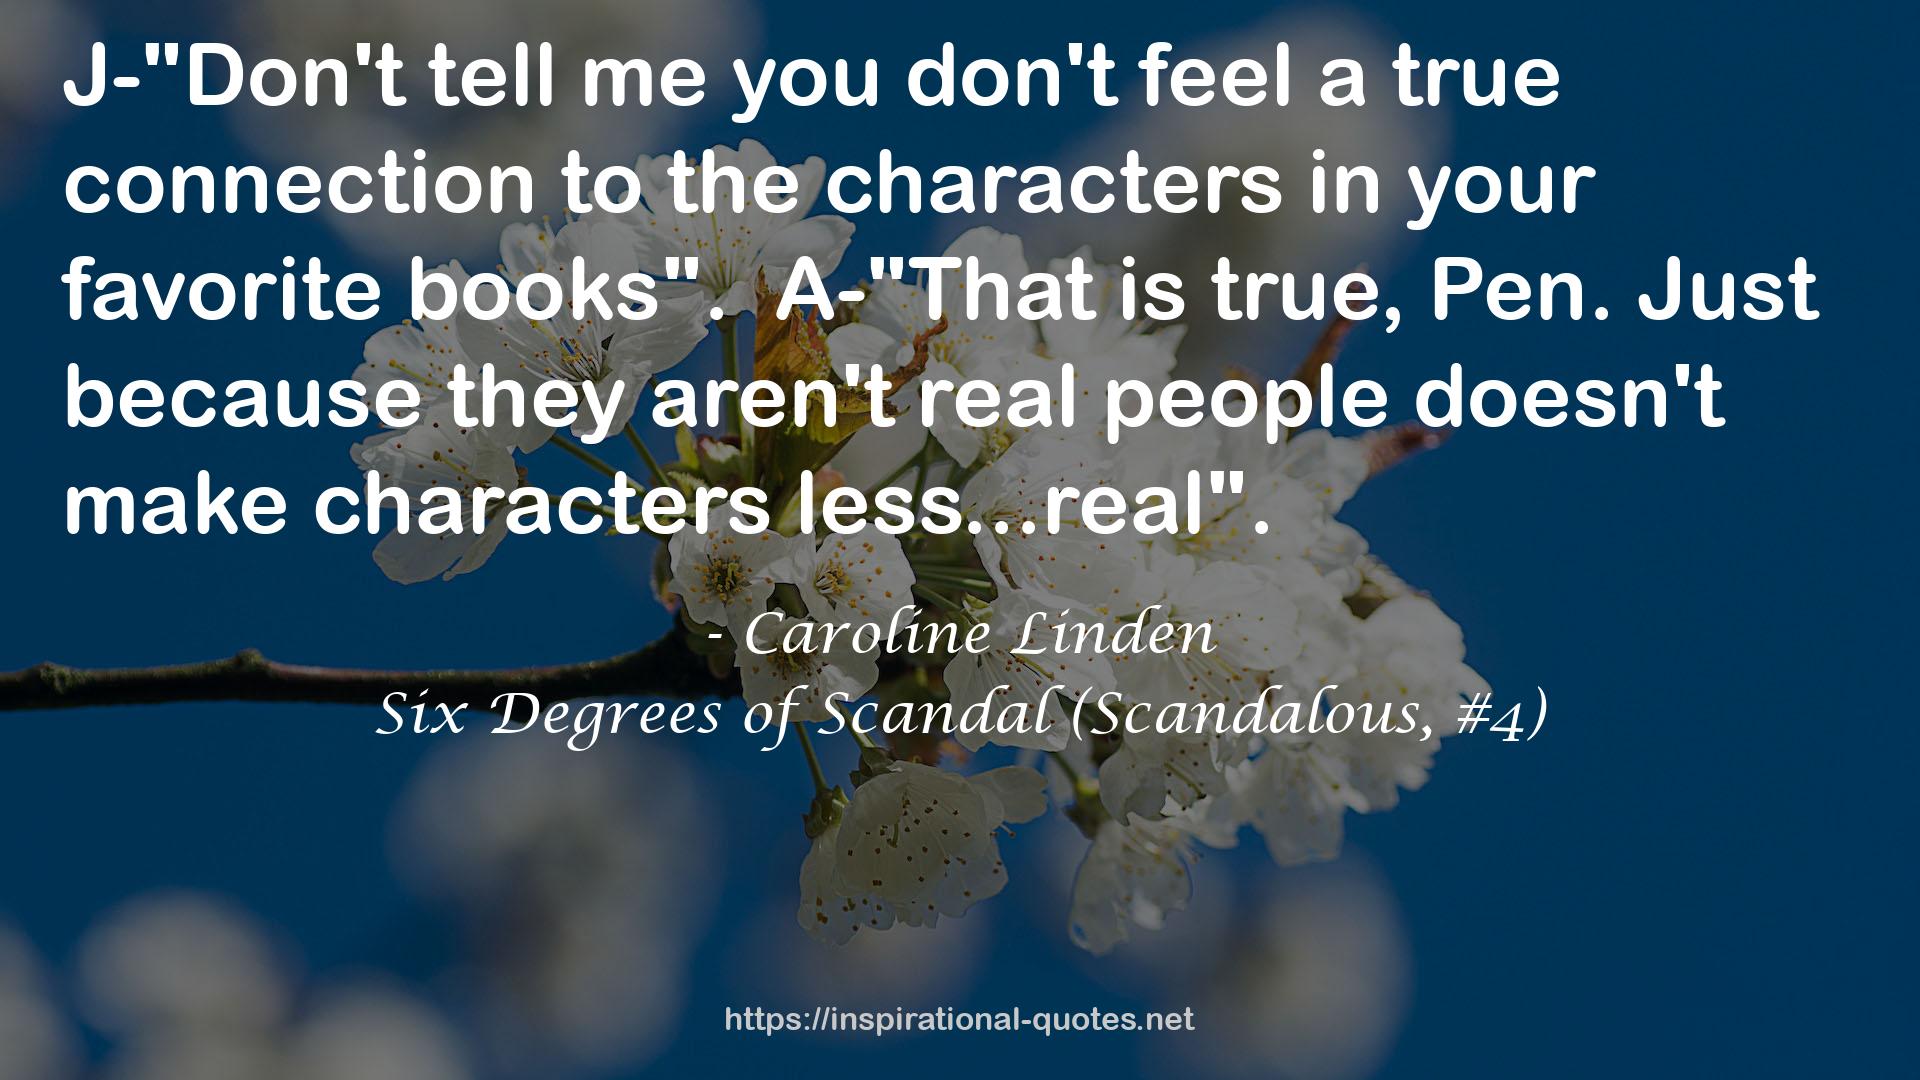 Six Degrees of Scandal (Scandalous, #4) QUOTES